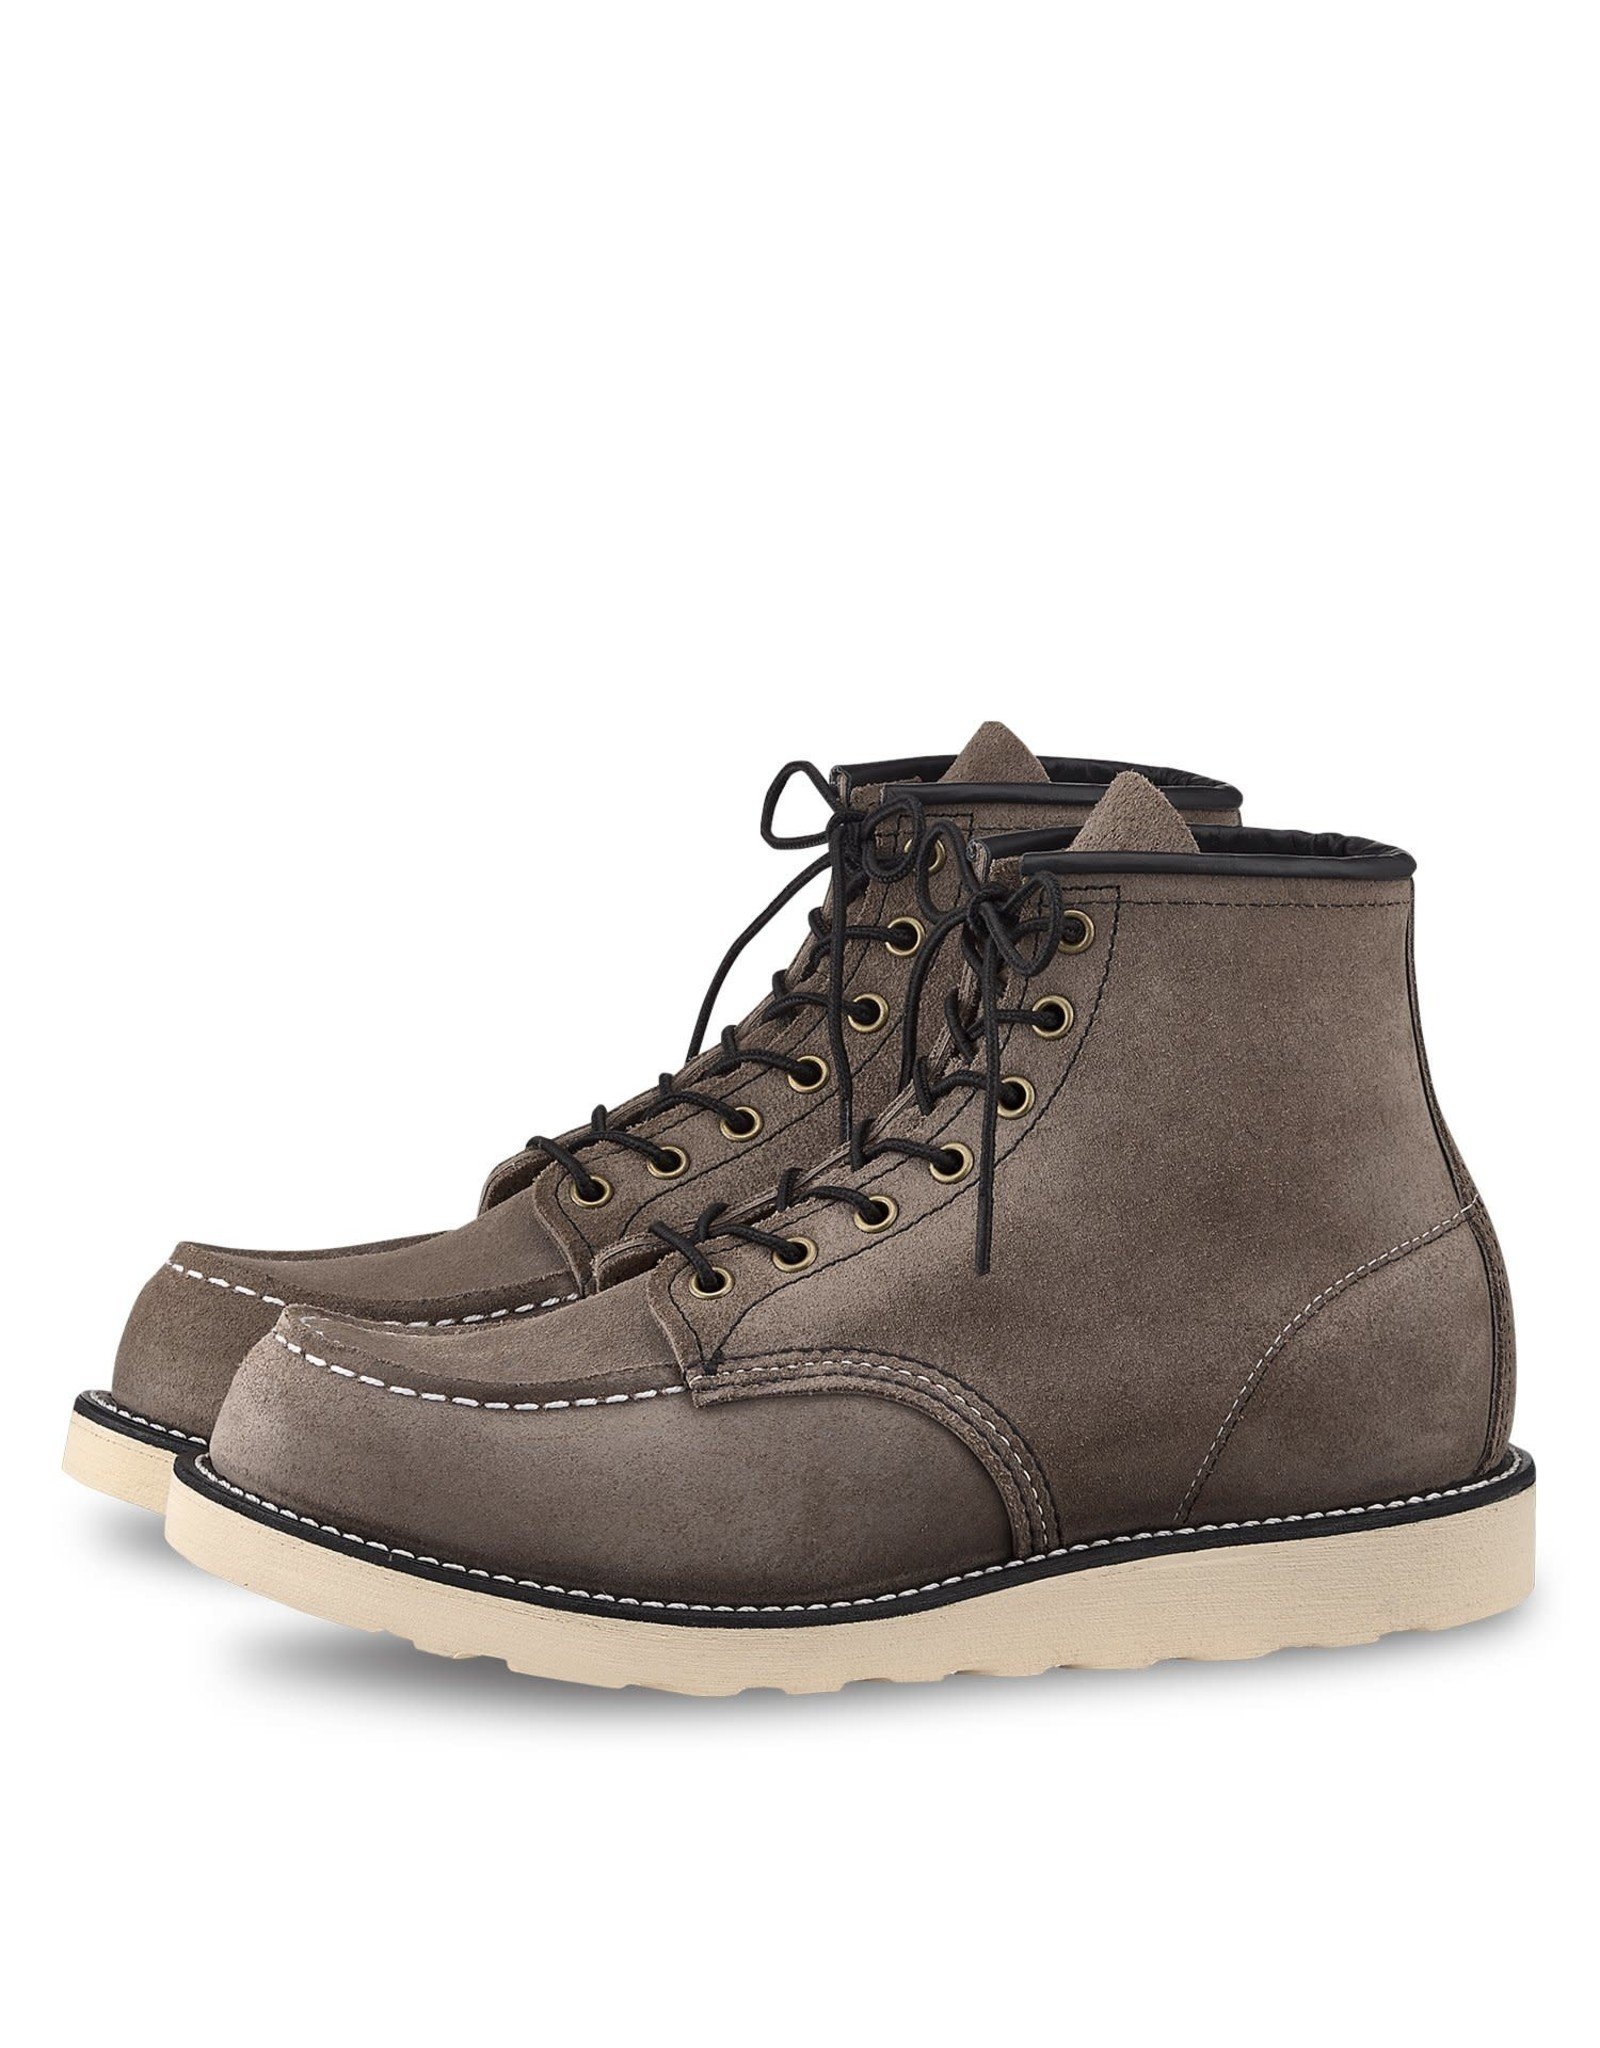 Red Wing Shoes 8863 Classic Moc Toe